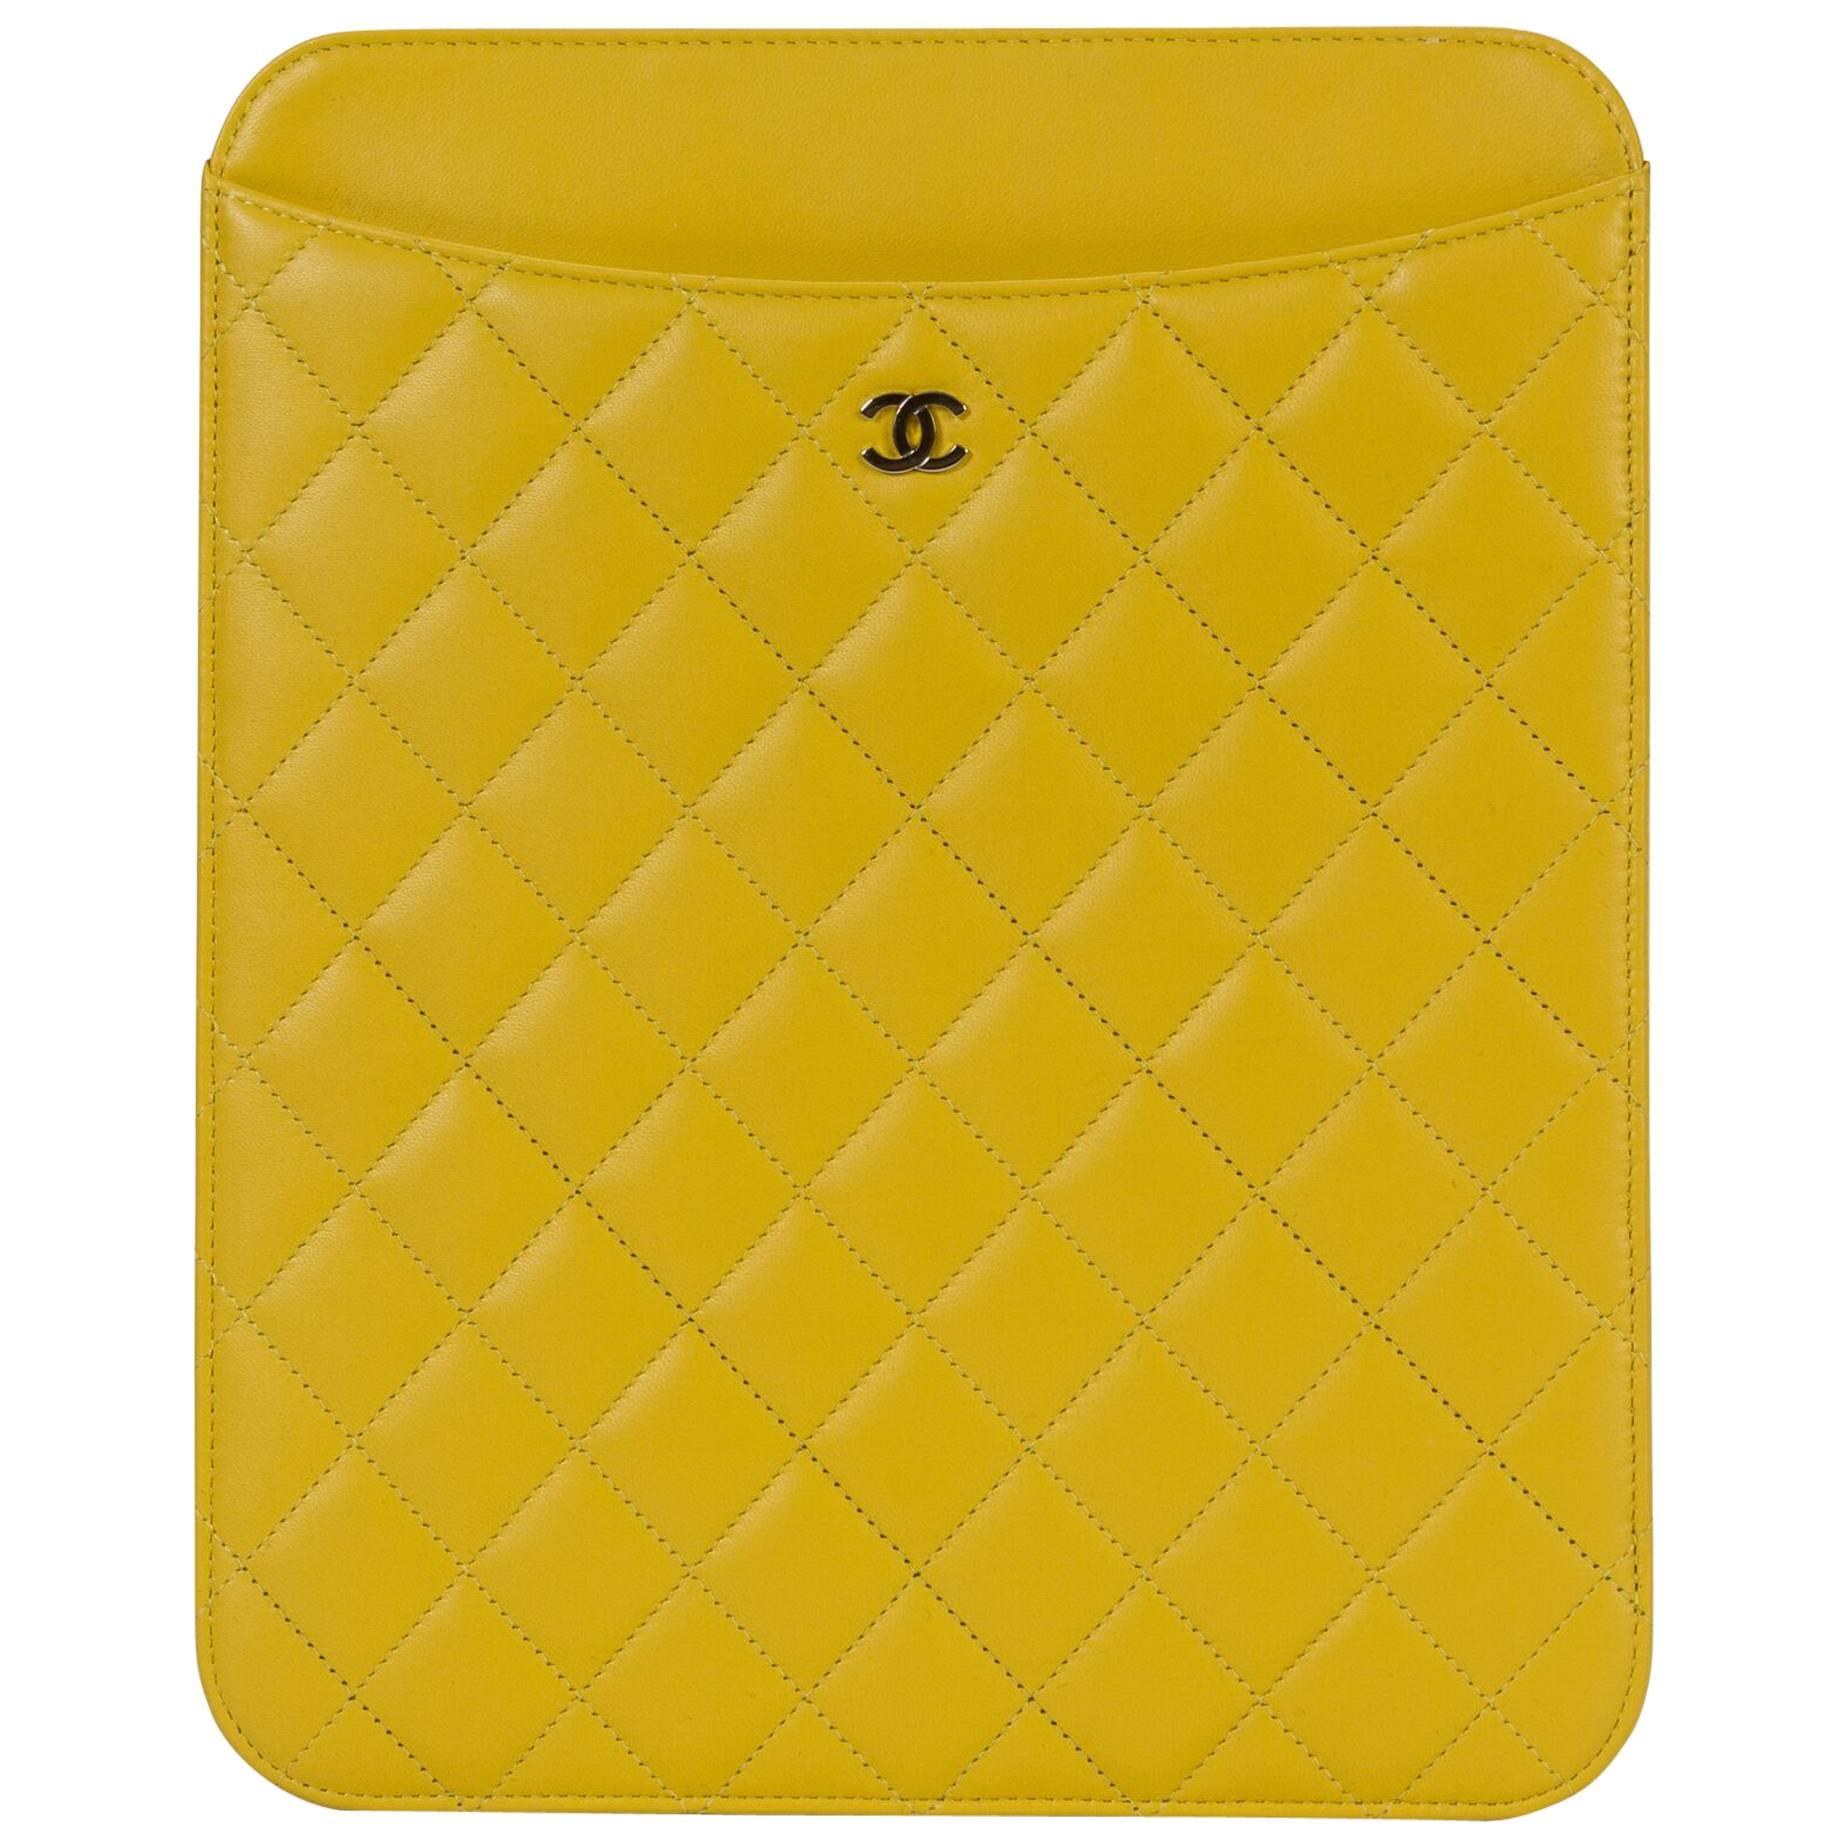 New in Box Chanel Yellow Quilted Leather Ipad Case